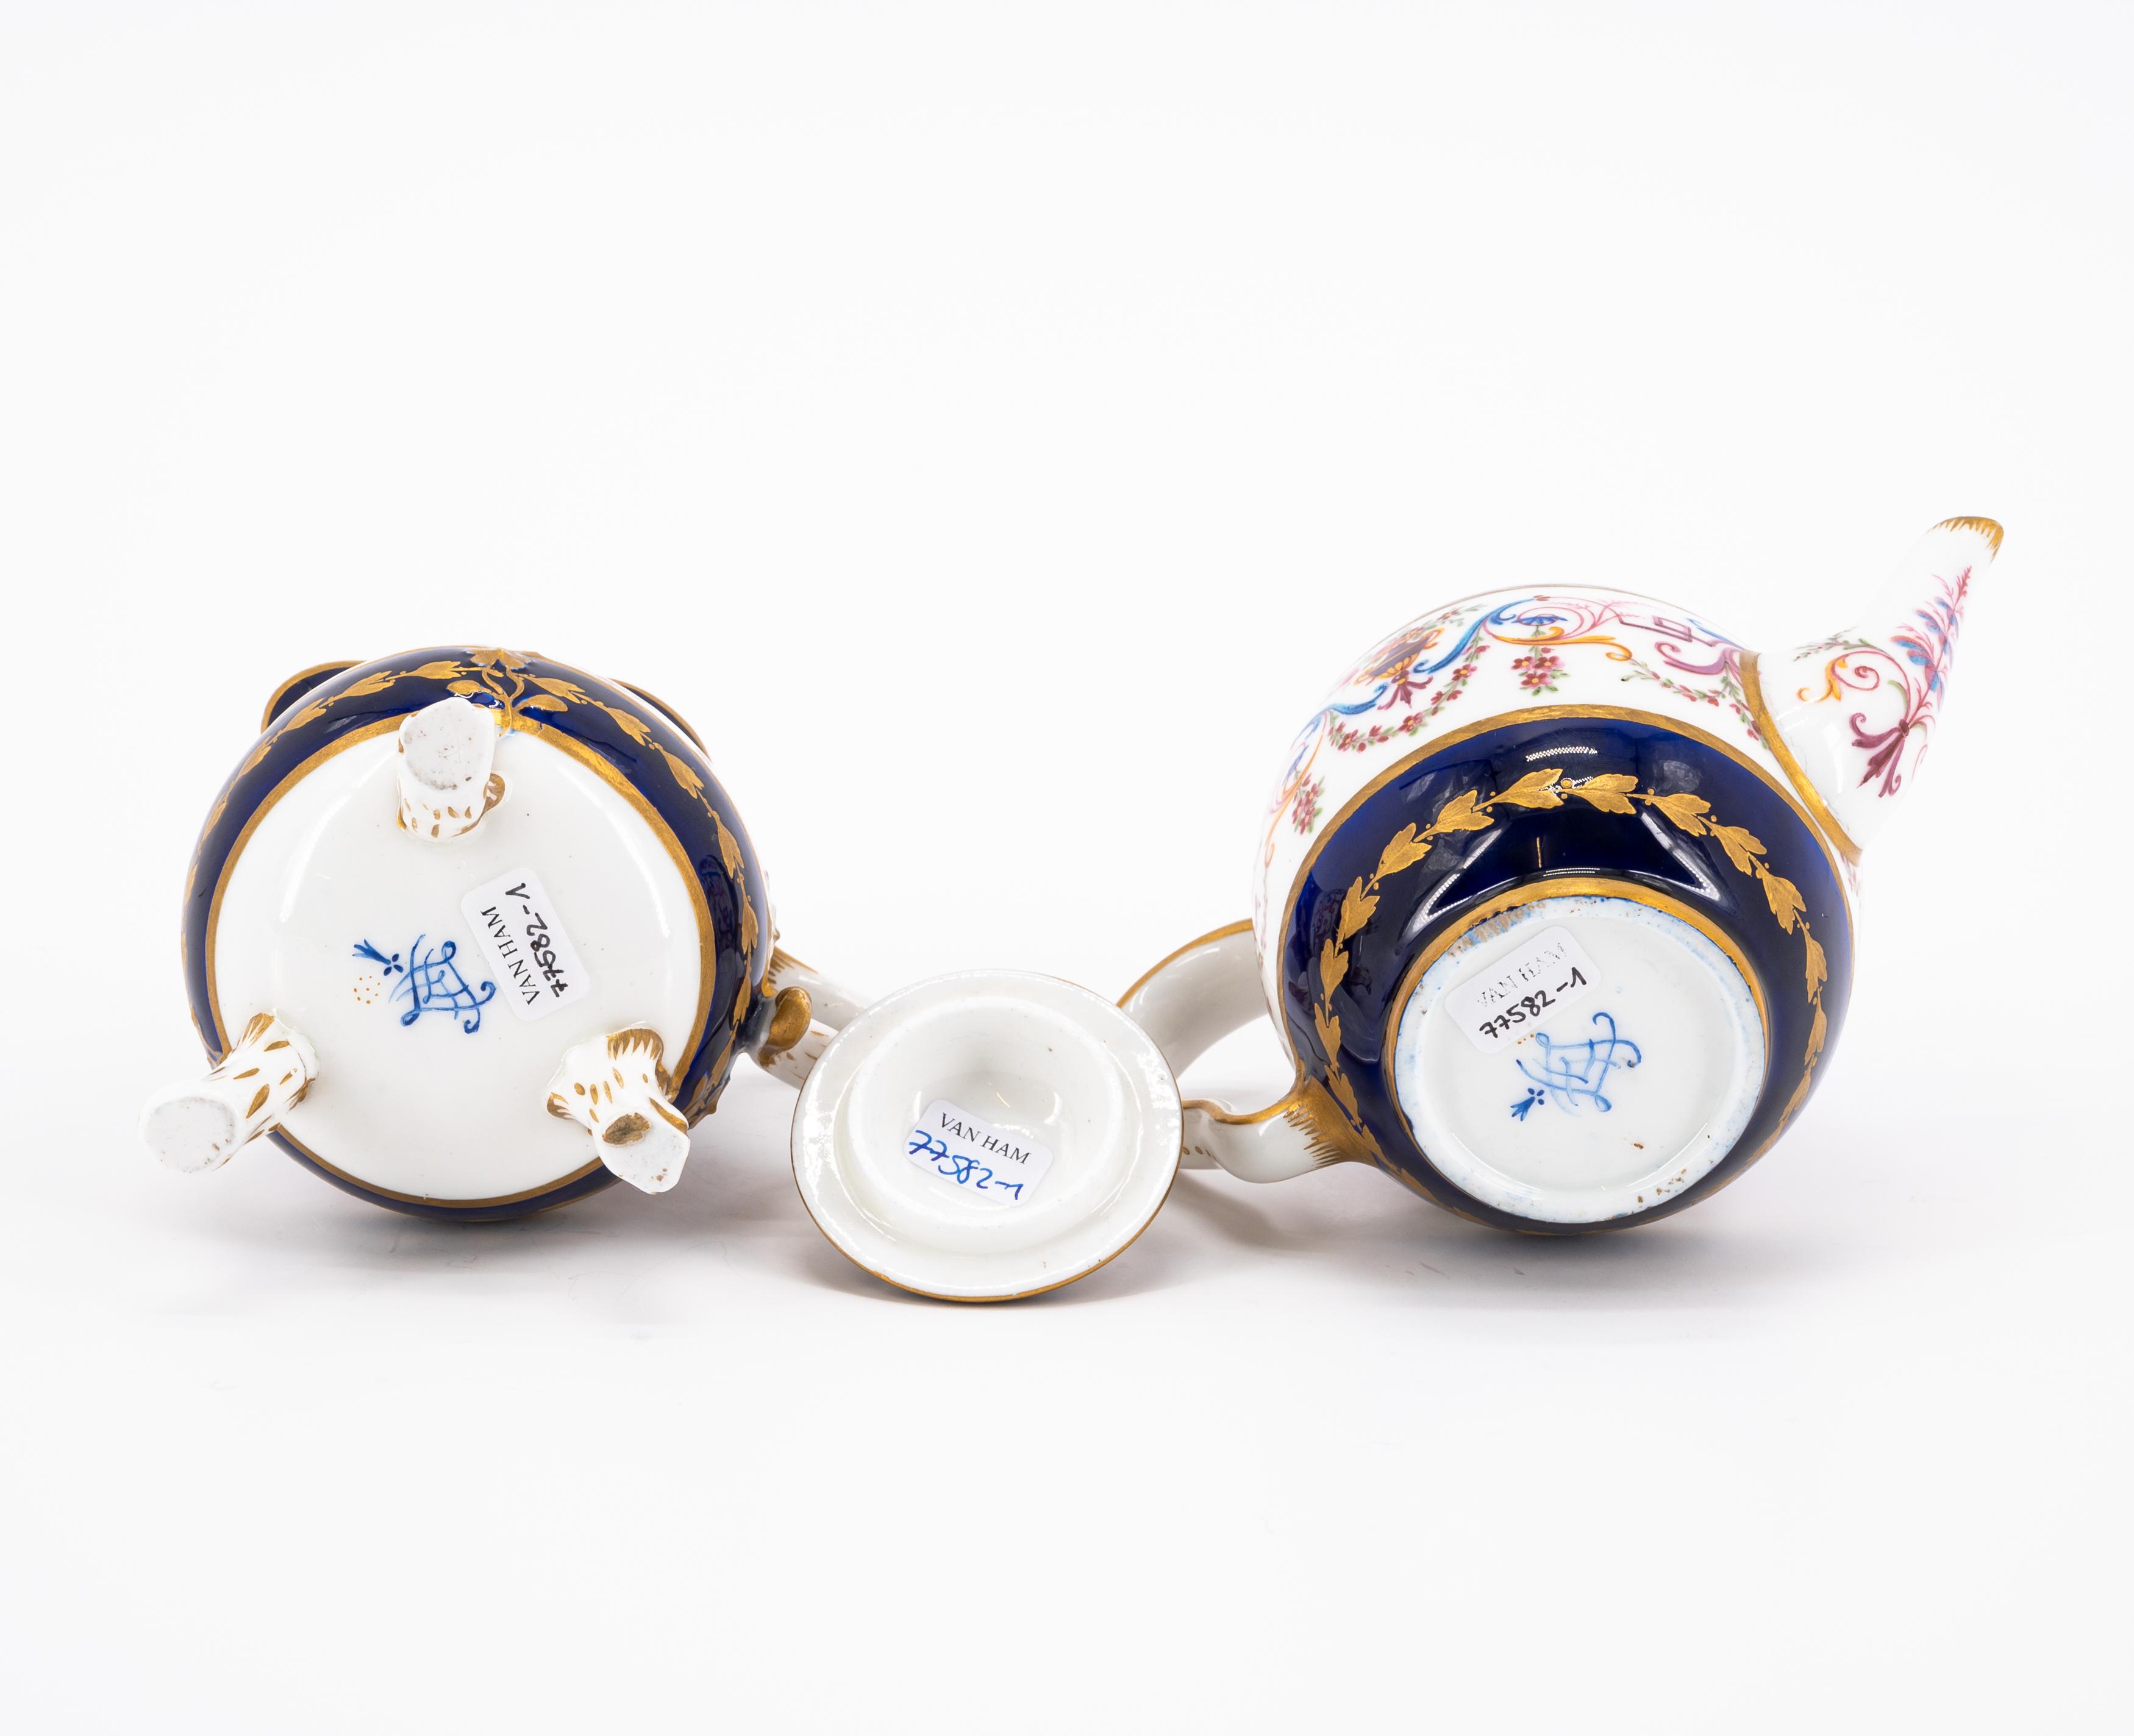 PORCELAIN SOLITAIRE WITH TENDRIL DECORATIONS AND DEEP BLUE GROUND - Image 13 of 13